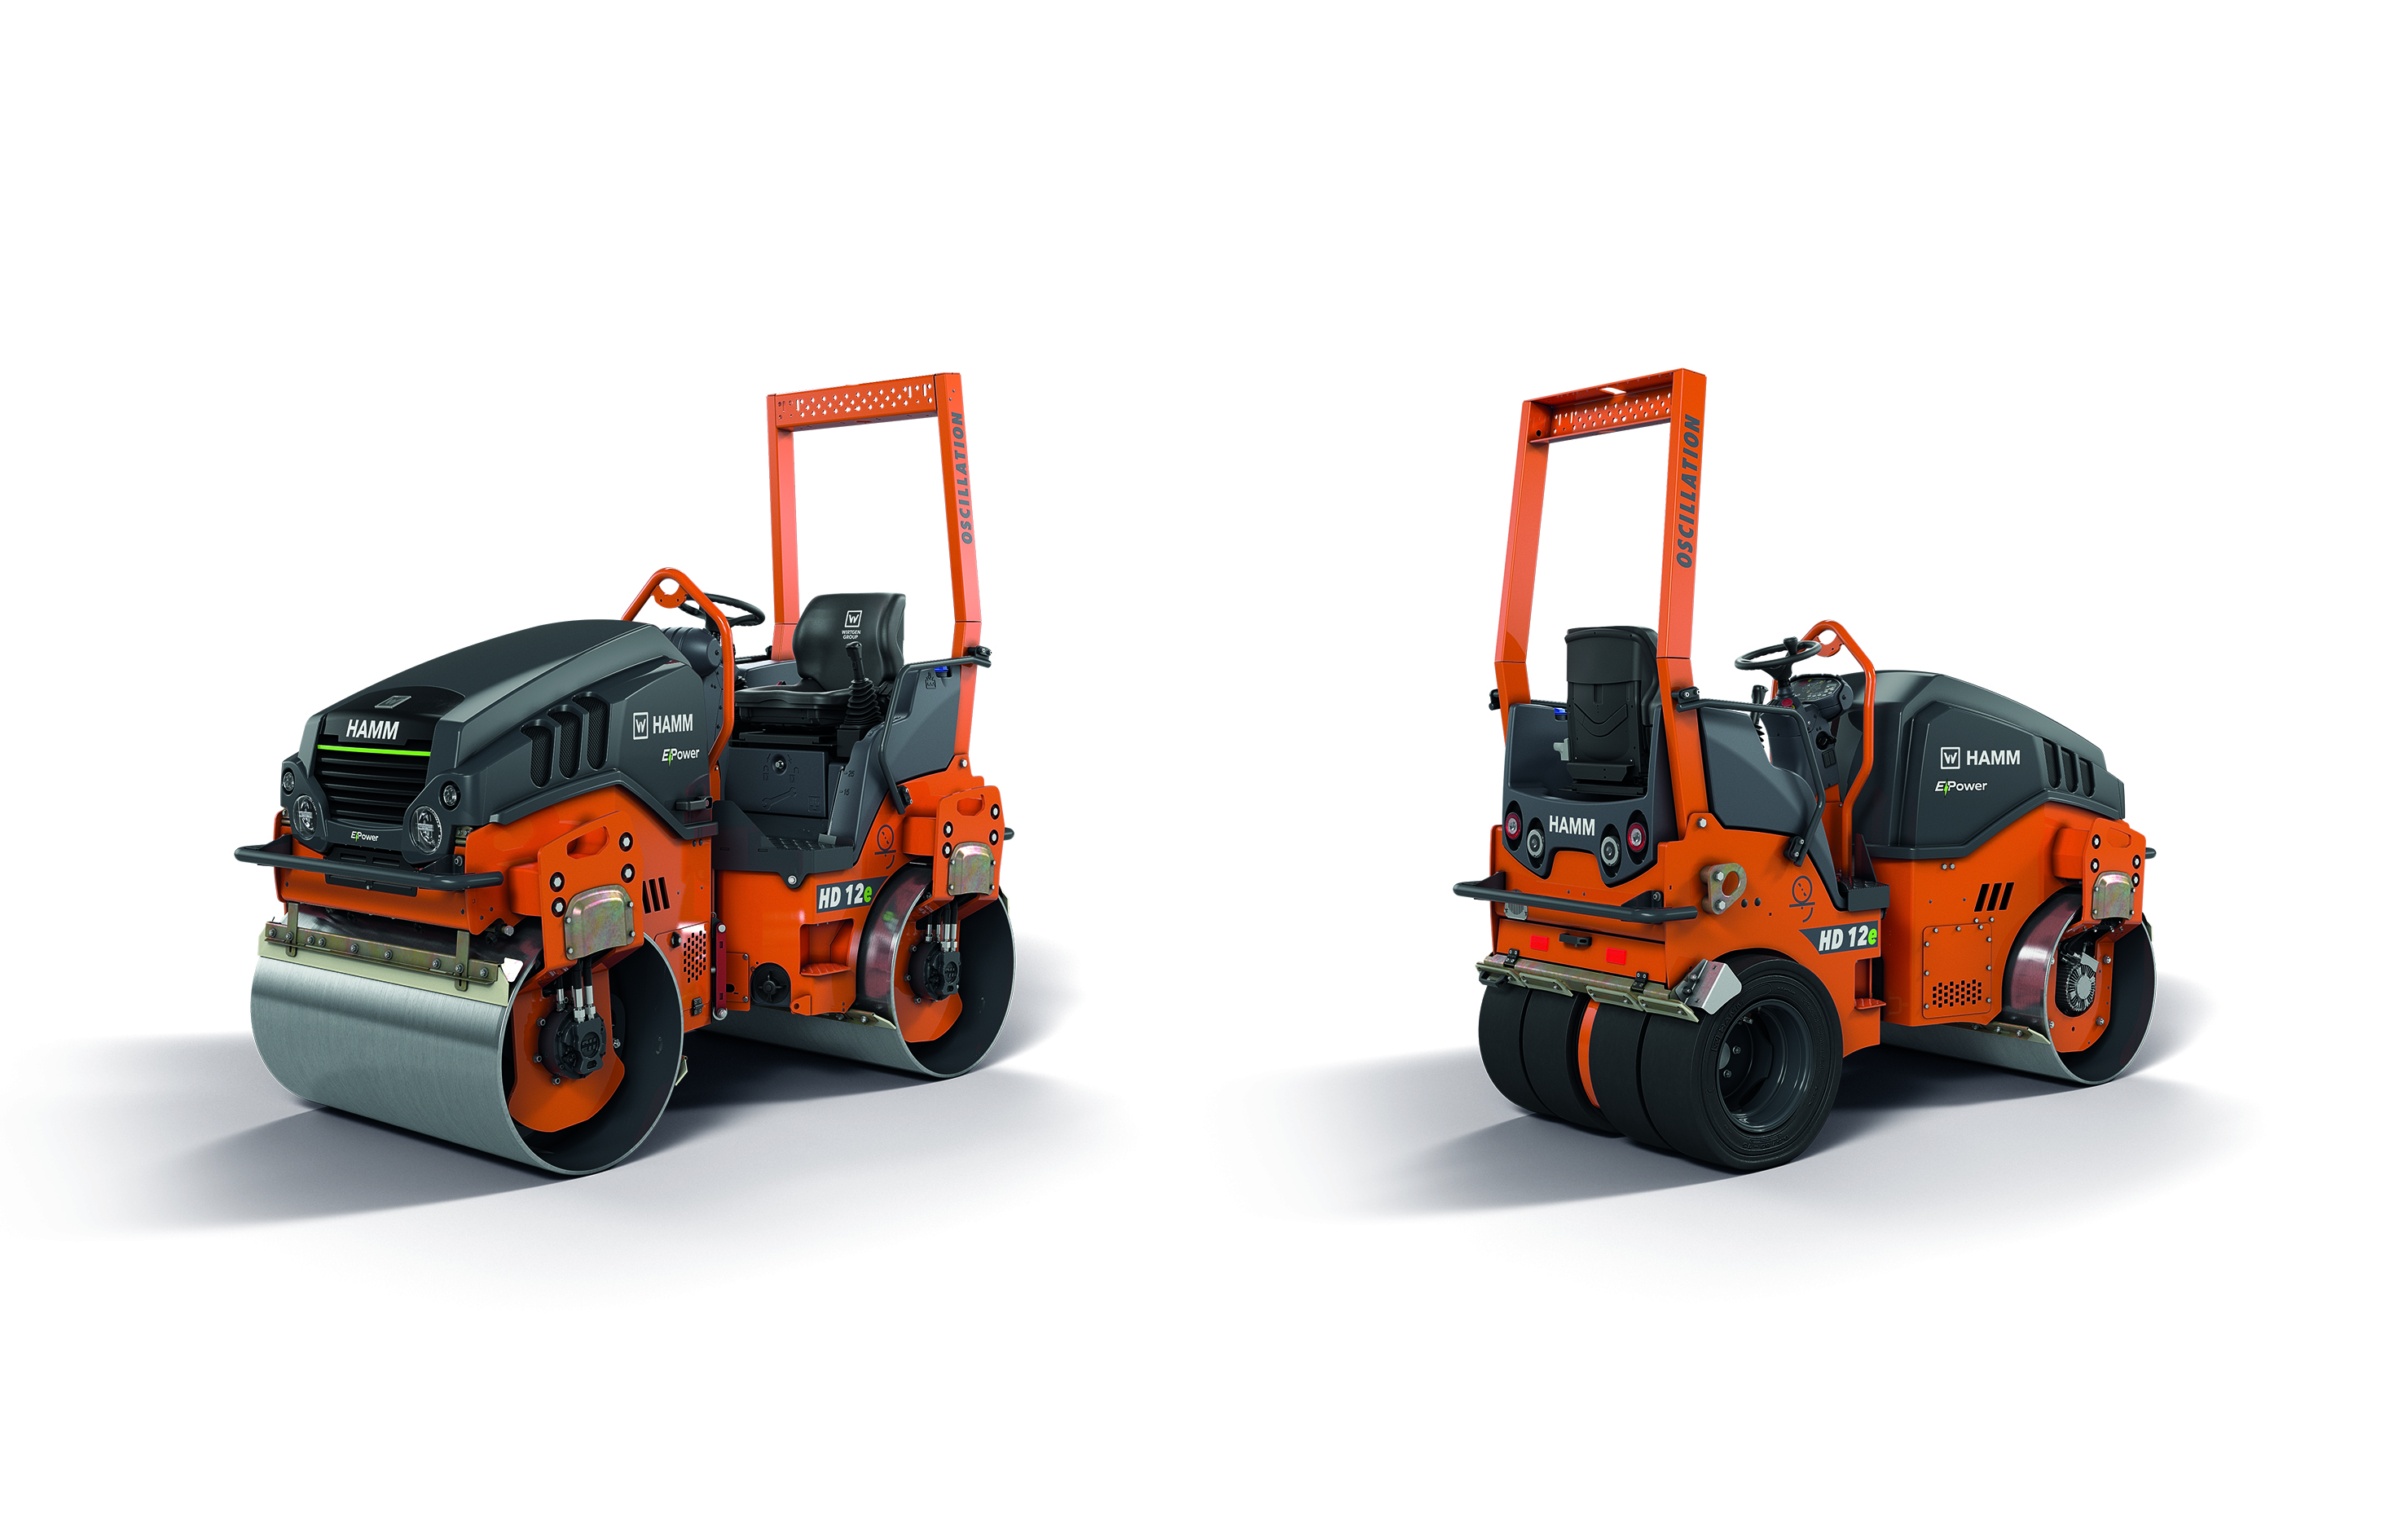 Battery-powered electric tandem rollers: Visitors to the Bauma 2022 had the chance to see the HD 12e VO (with vibration and oscillation drums) and the HD 12e OT (combination roller with oscillation) for themselves. The compaction parameters and operation are identical to the diesel engine models.